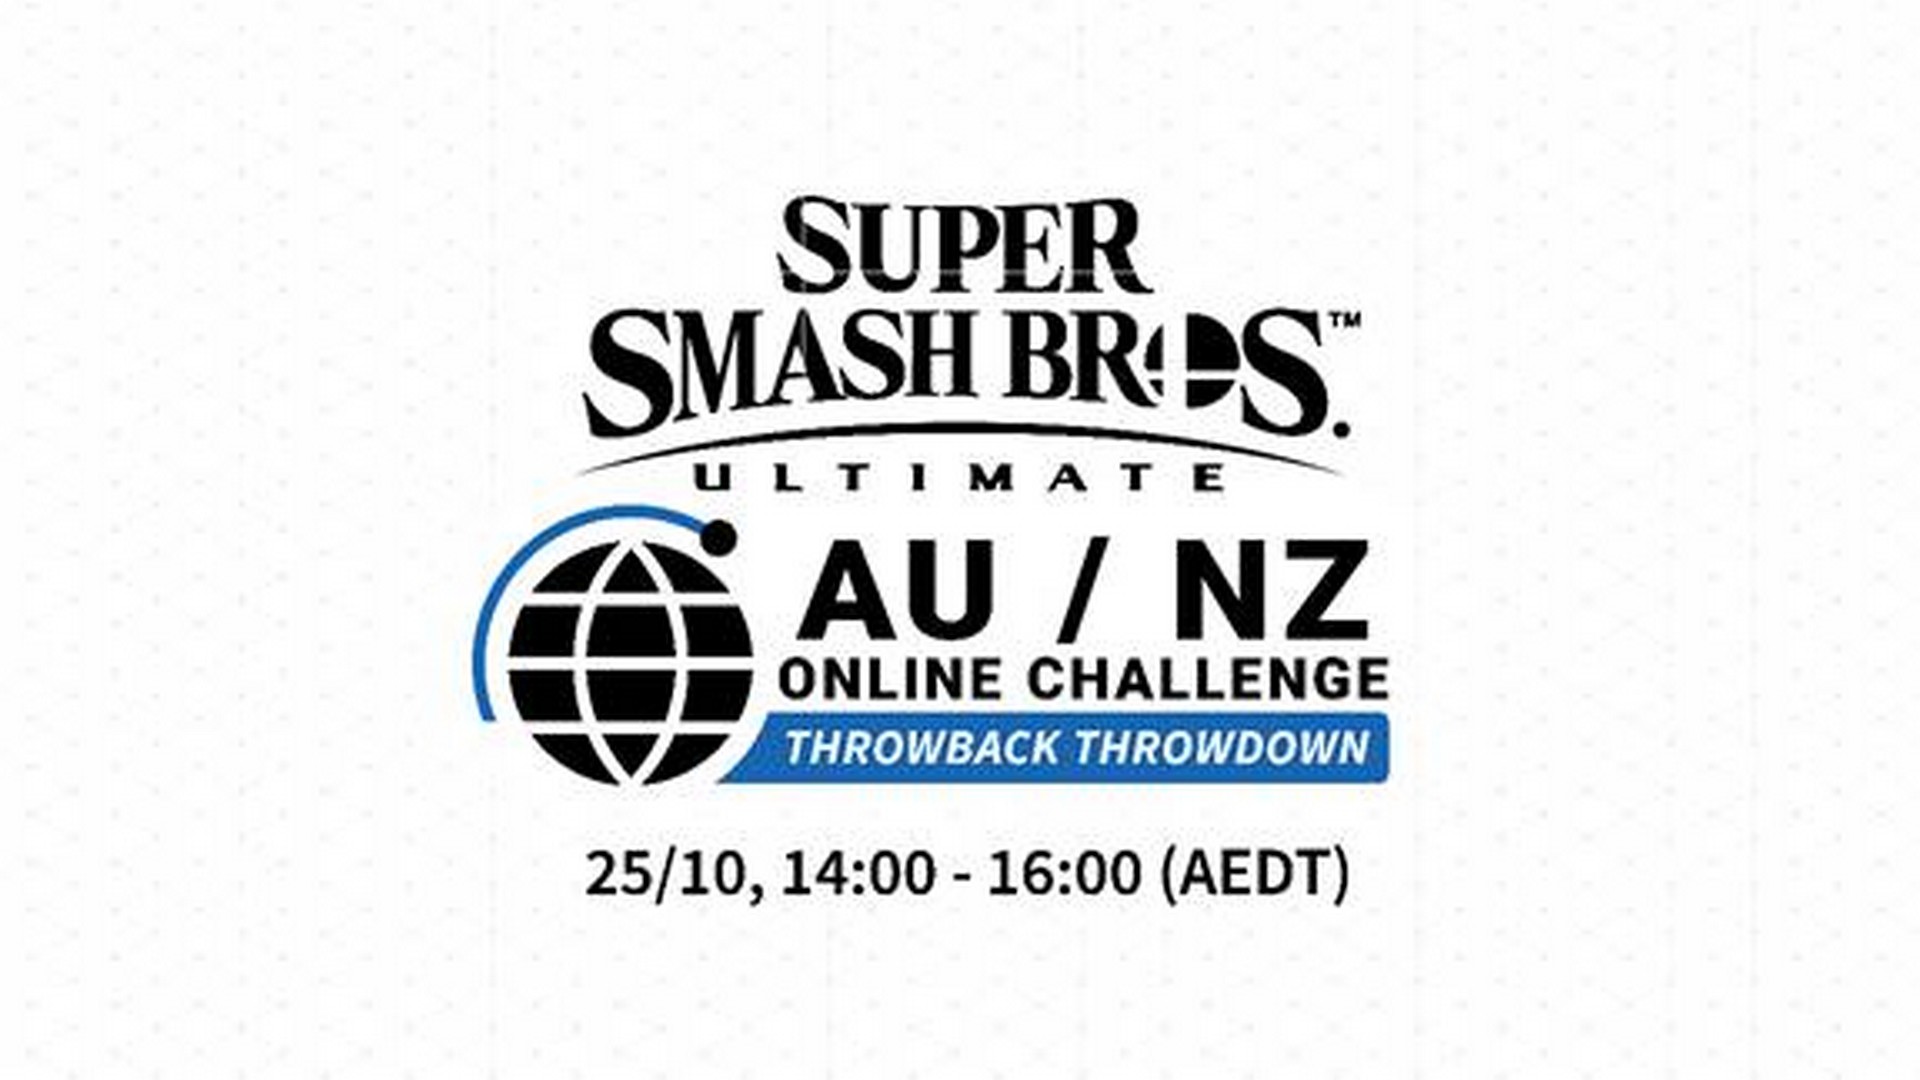 Australia And New Zealand’s Super Smash Bros. Ultimate Throwback Throwdown Starts Sunday 25th October